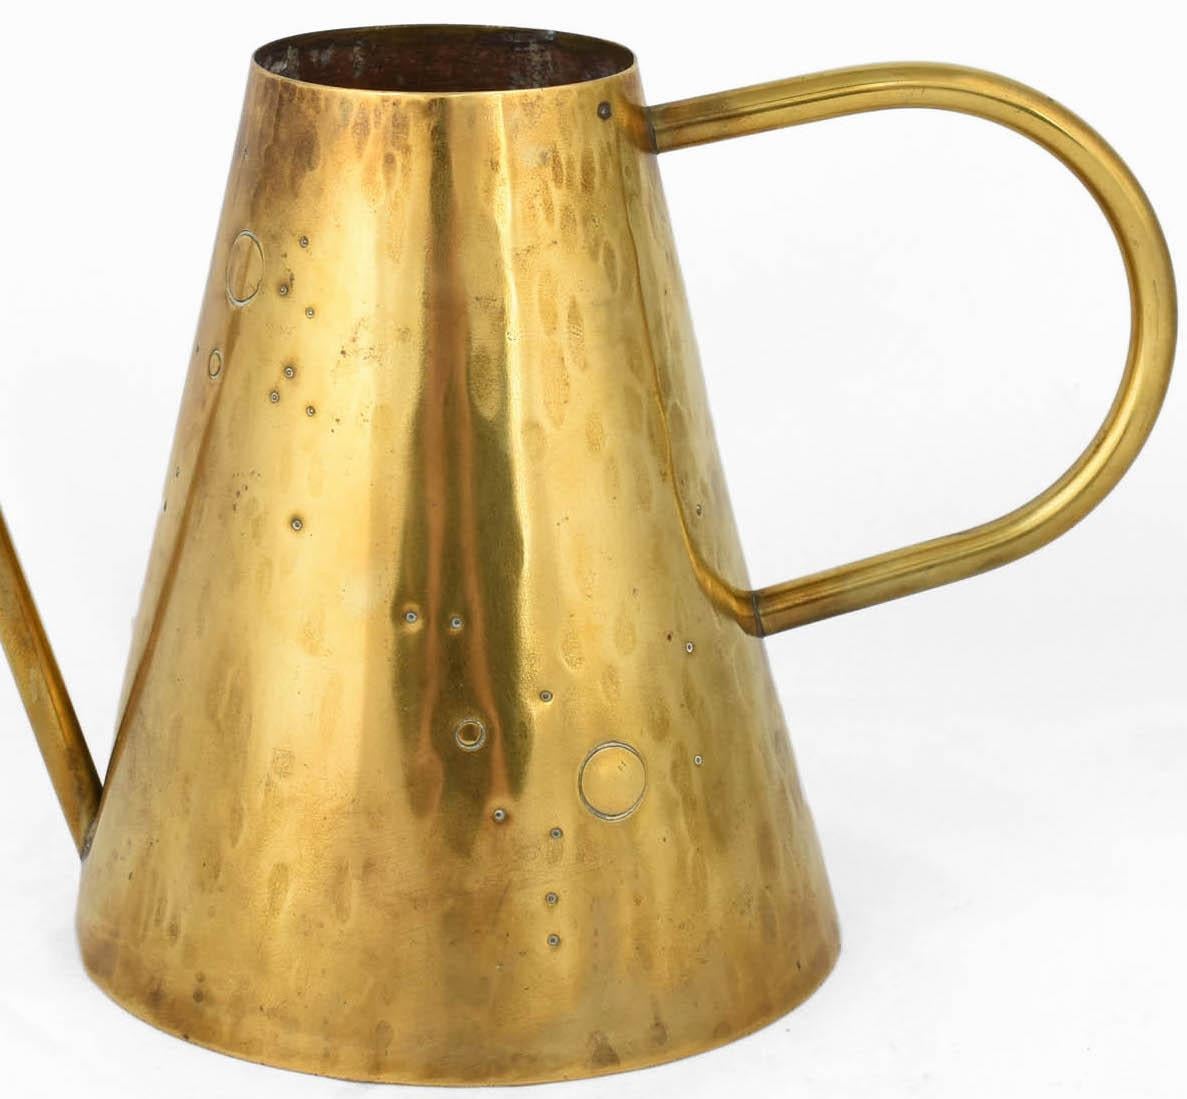 Vintage brass watering can is an original decorative object realized between 1950s and the 1960s.

Original brass product.

Handmade in Germany.

HS mark is present on the base. 

Good conditions: Vintage signs of age are